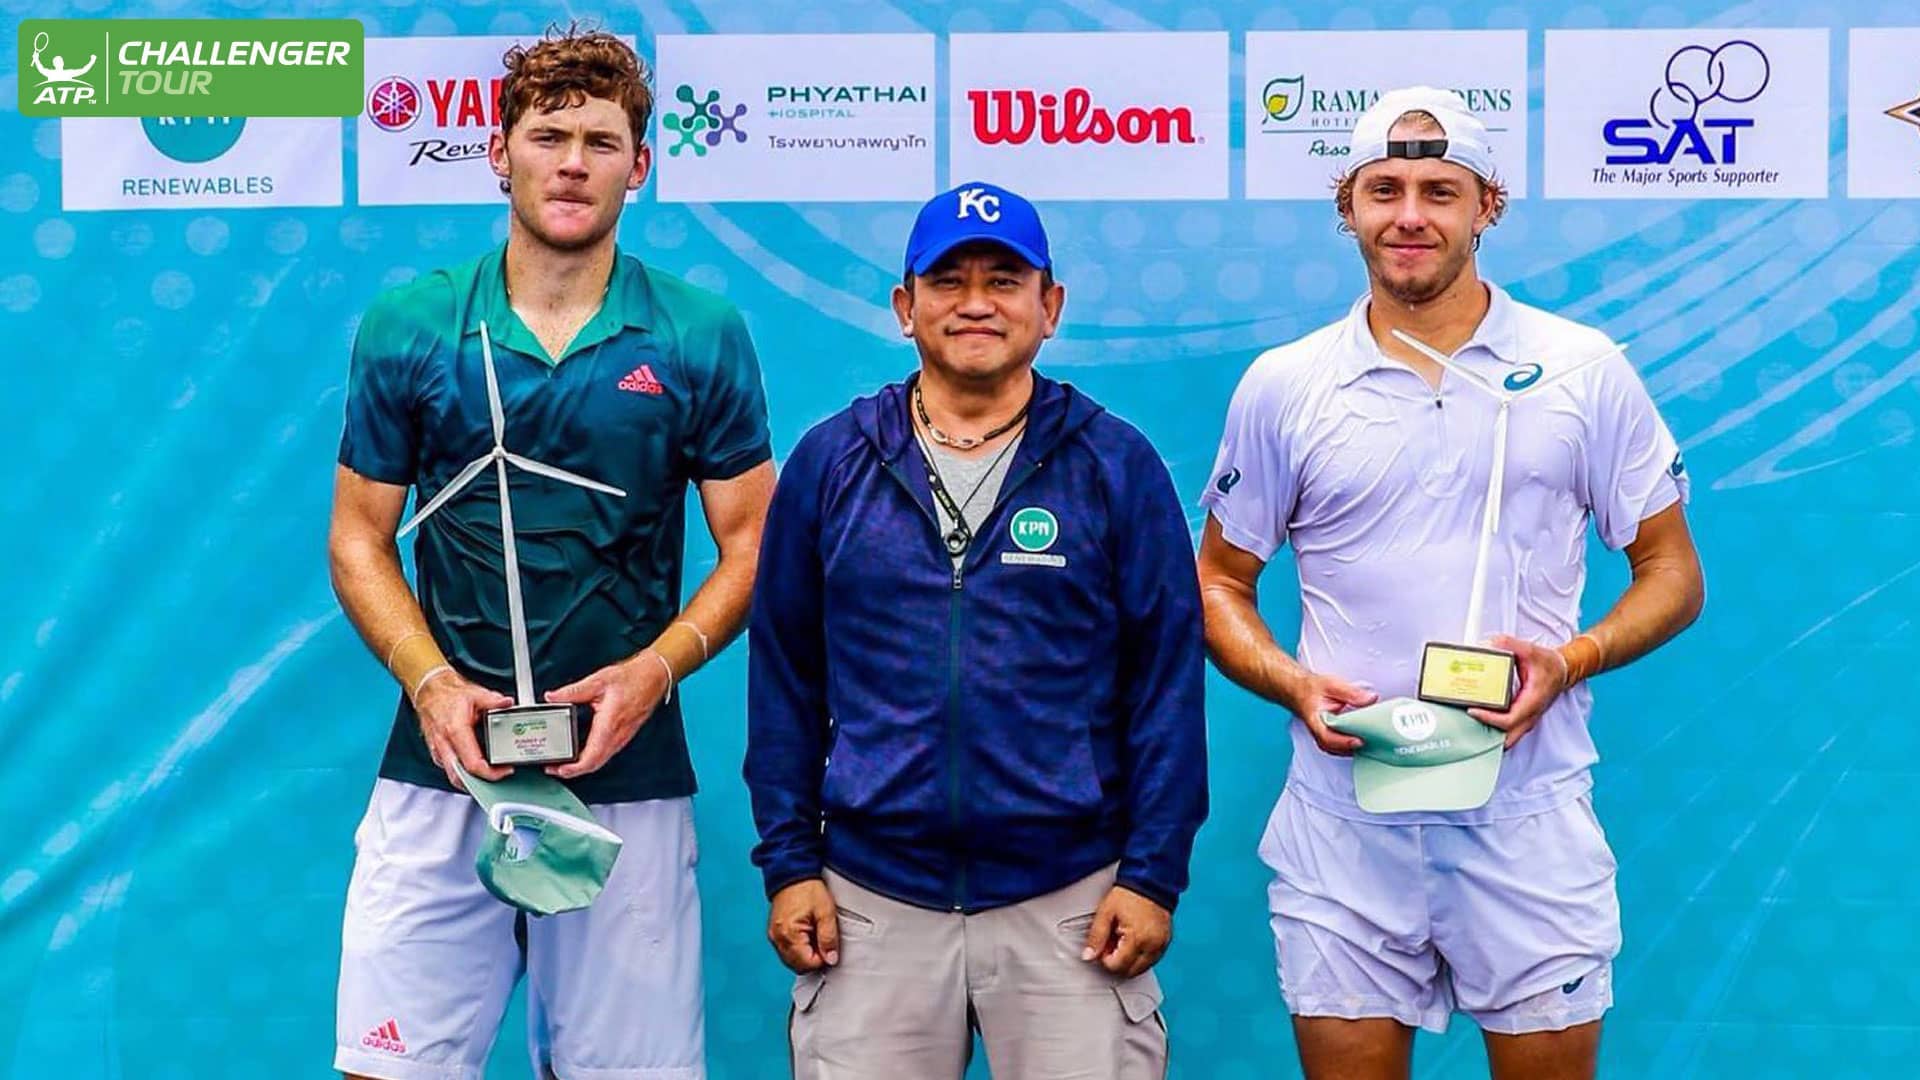 James Duckworth won his first ATP Challenger Tour title of the year in Bangkok.